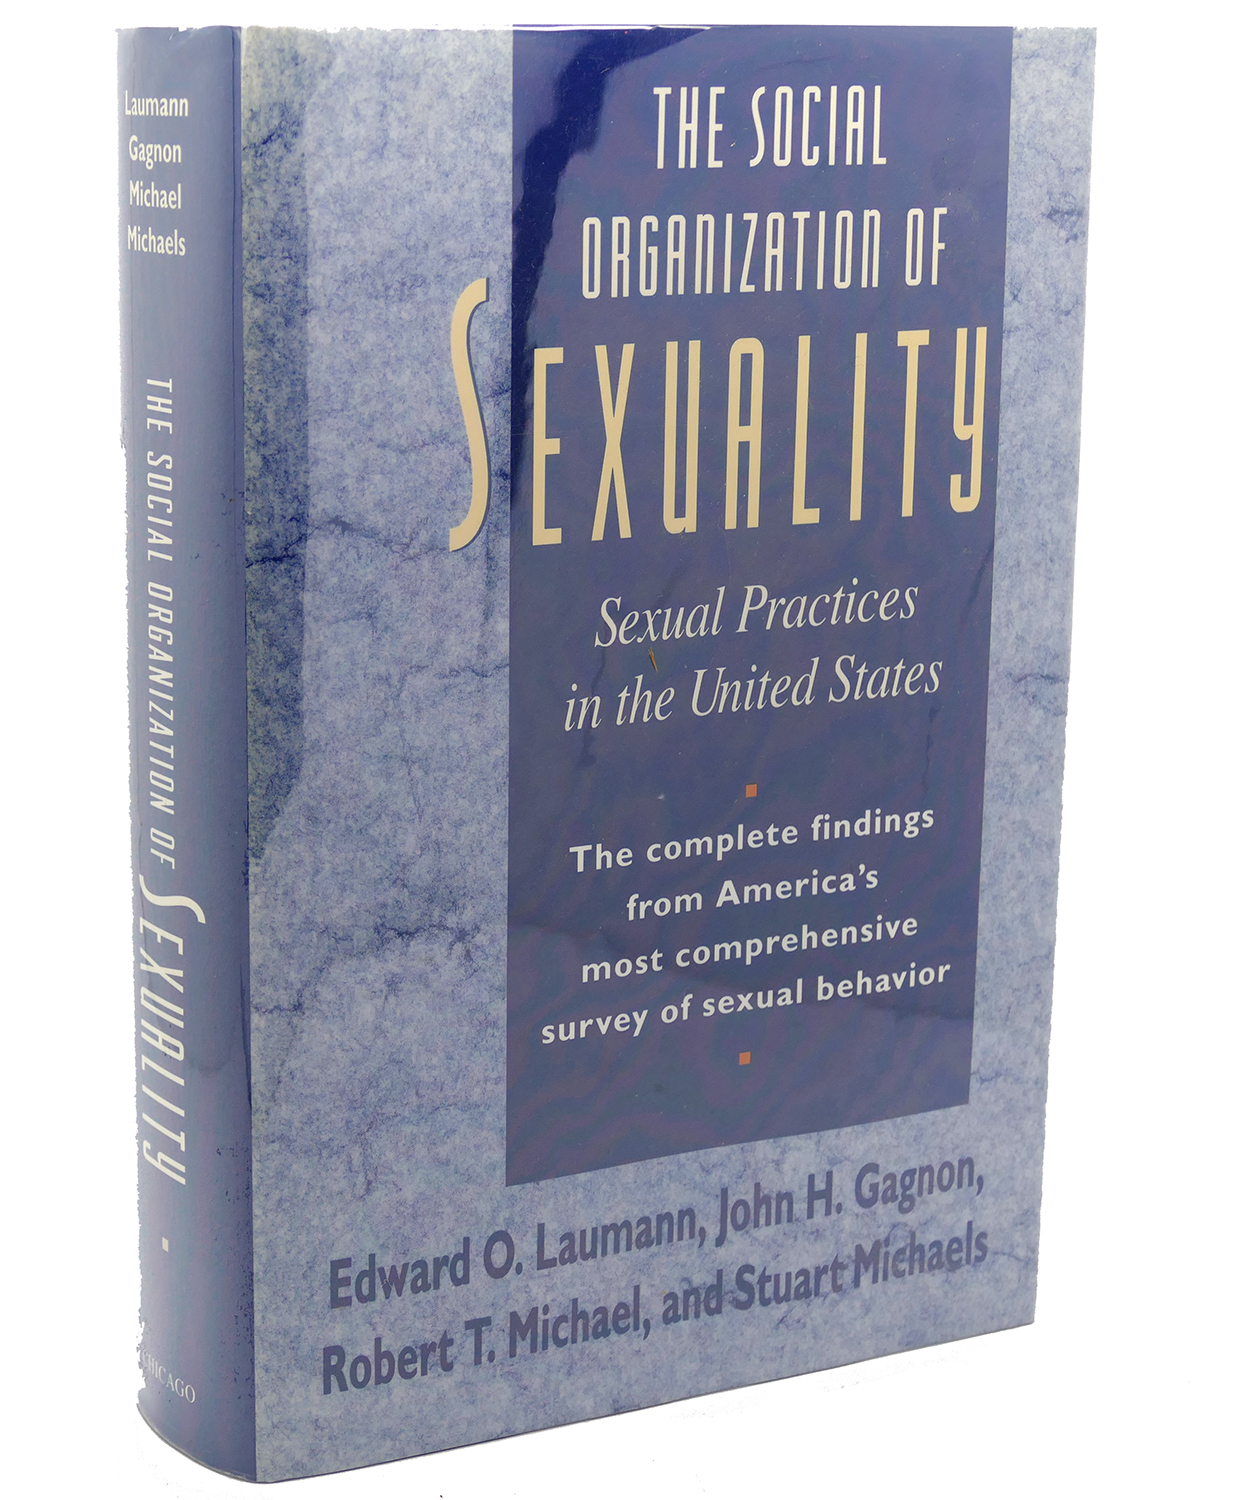 THE SOCIAL ORGANIZATION OF SEXUALITY : Sexual Practices in the United States - Edward O. Laumann, John H. Gagnon, Robert T. Michael, Stuart Michaels